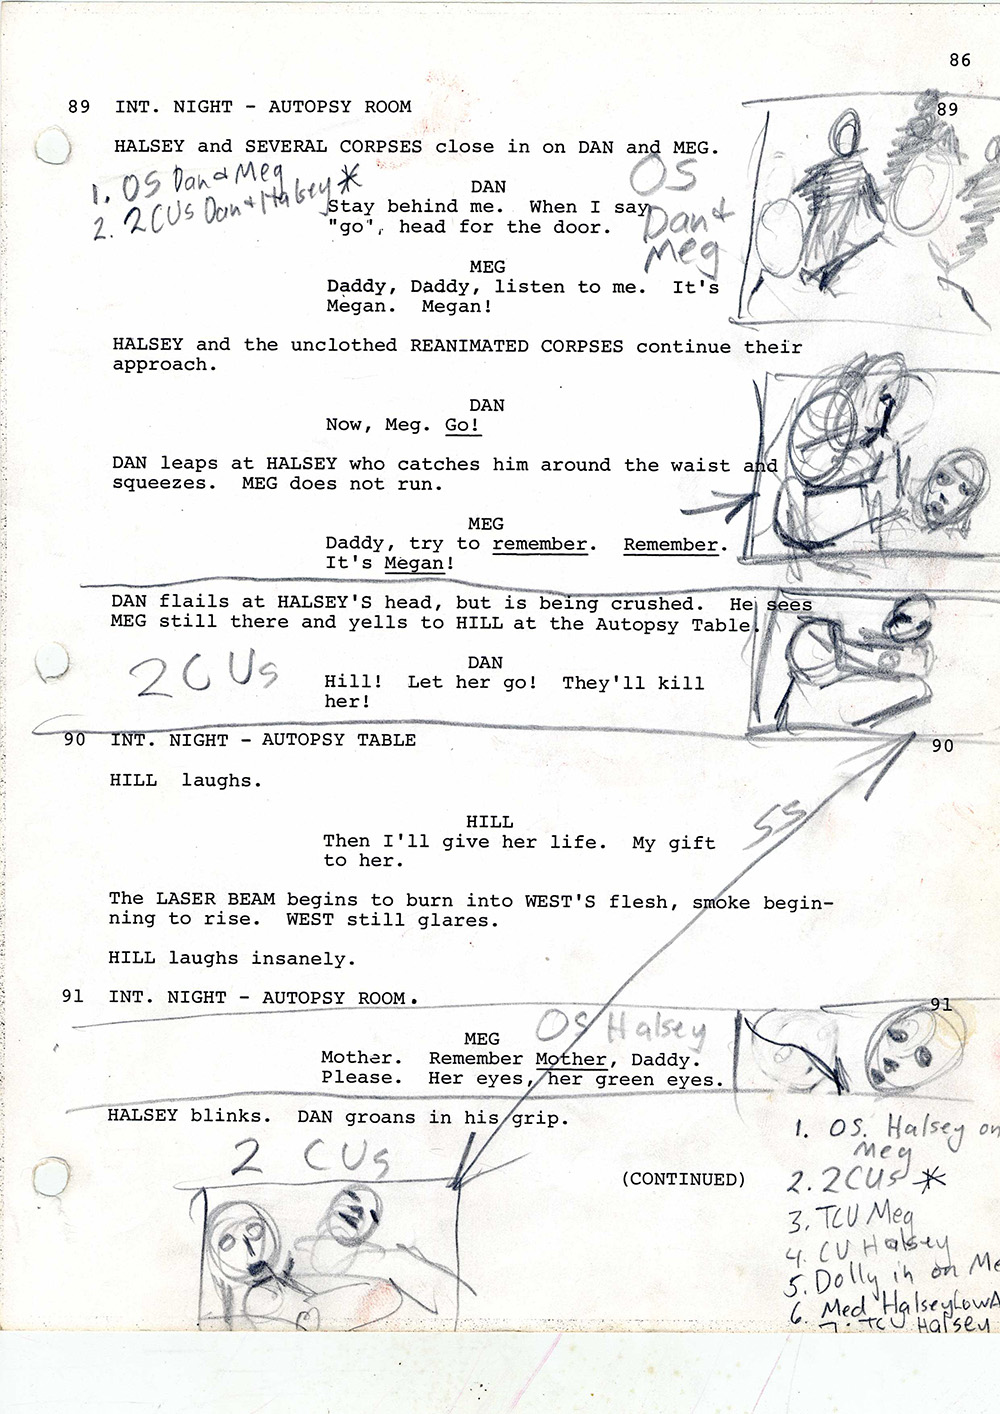 A page from the script of Re-Animator, with handwritten notes and storyboards by Gordon.